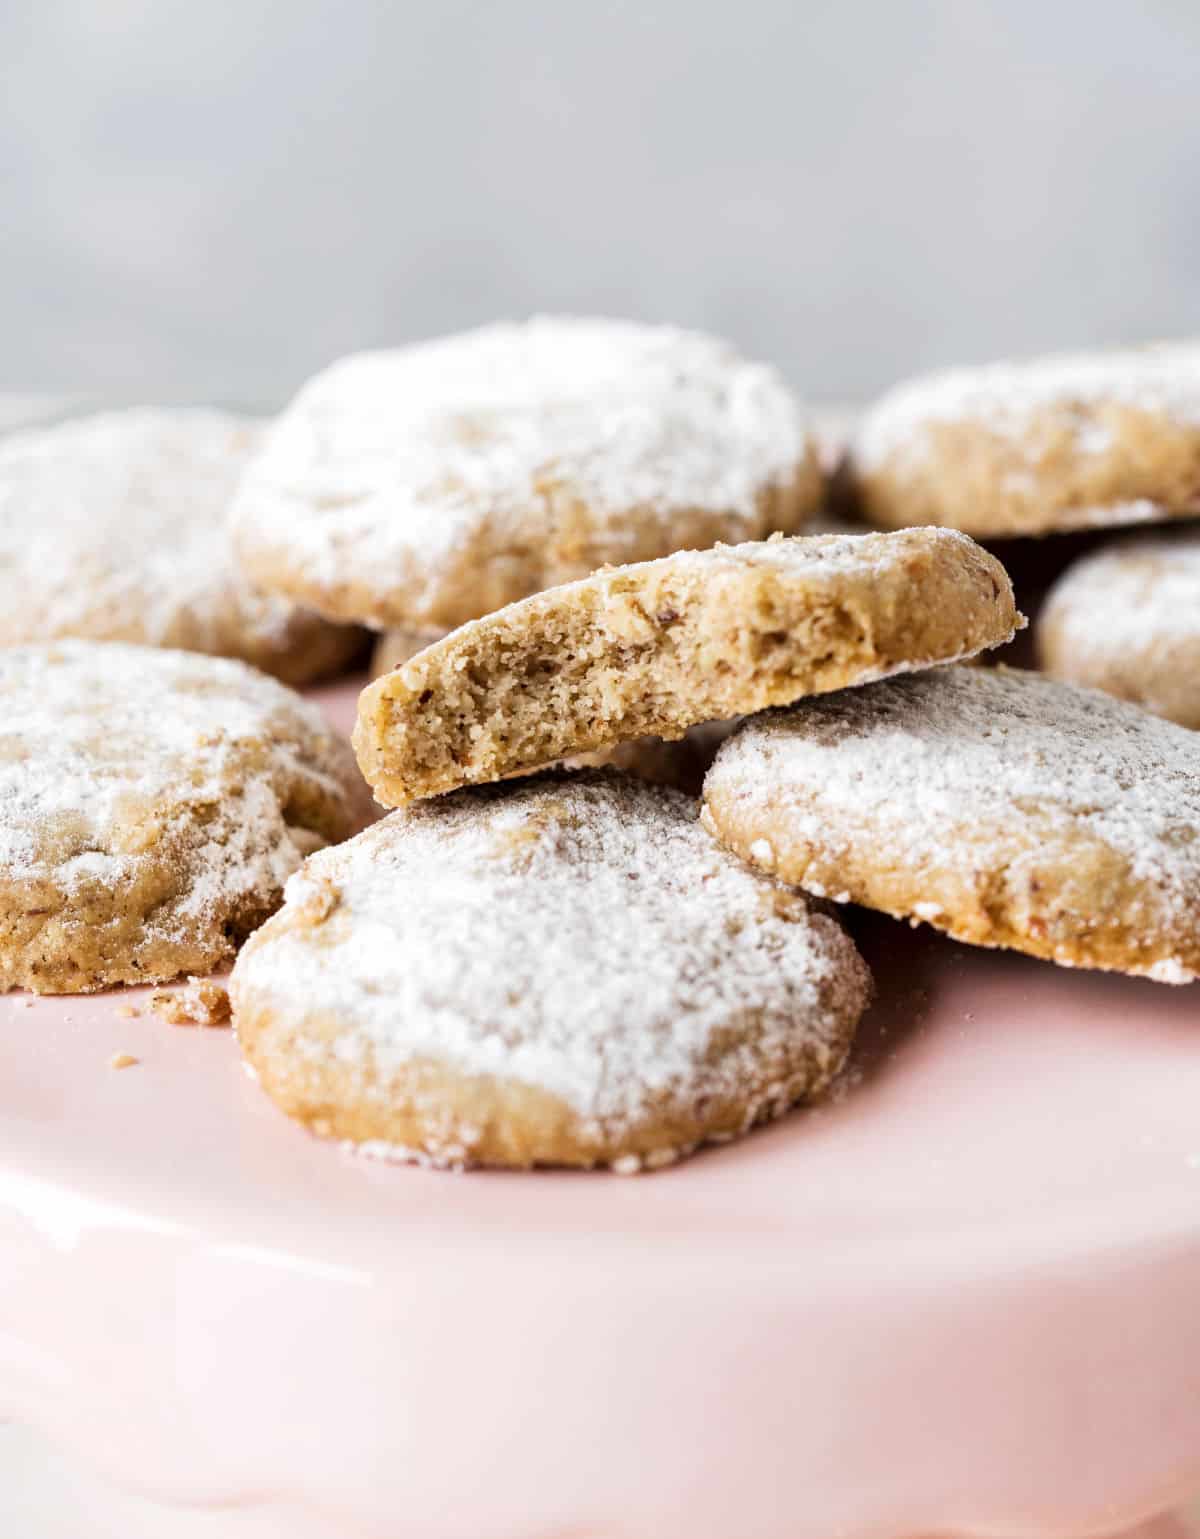 Pile of pecan cookies with powdered sugar, one is bitten, on a pink plate with a grey background,